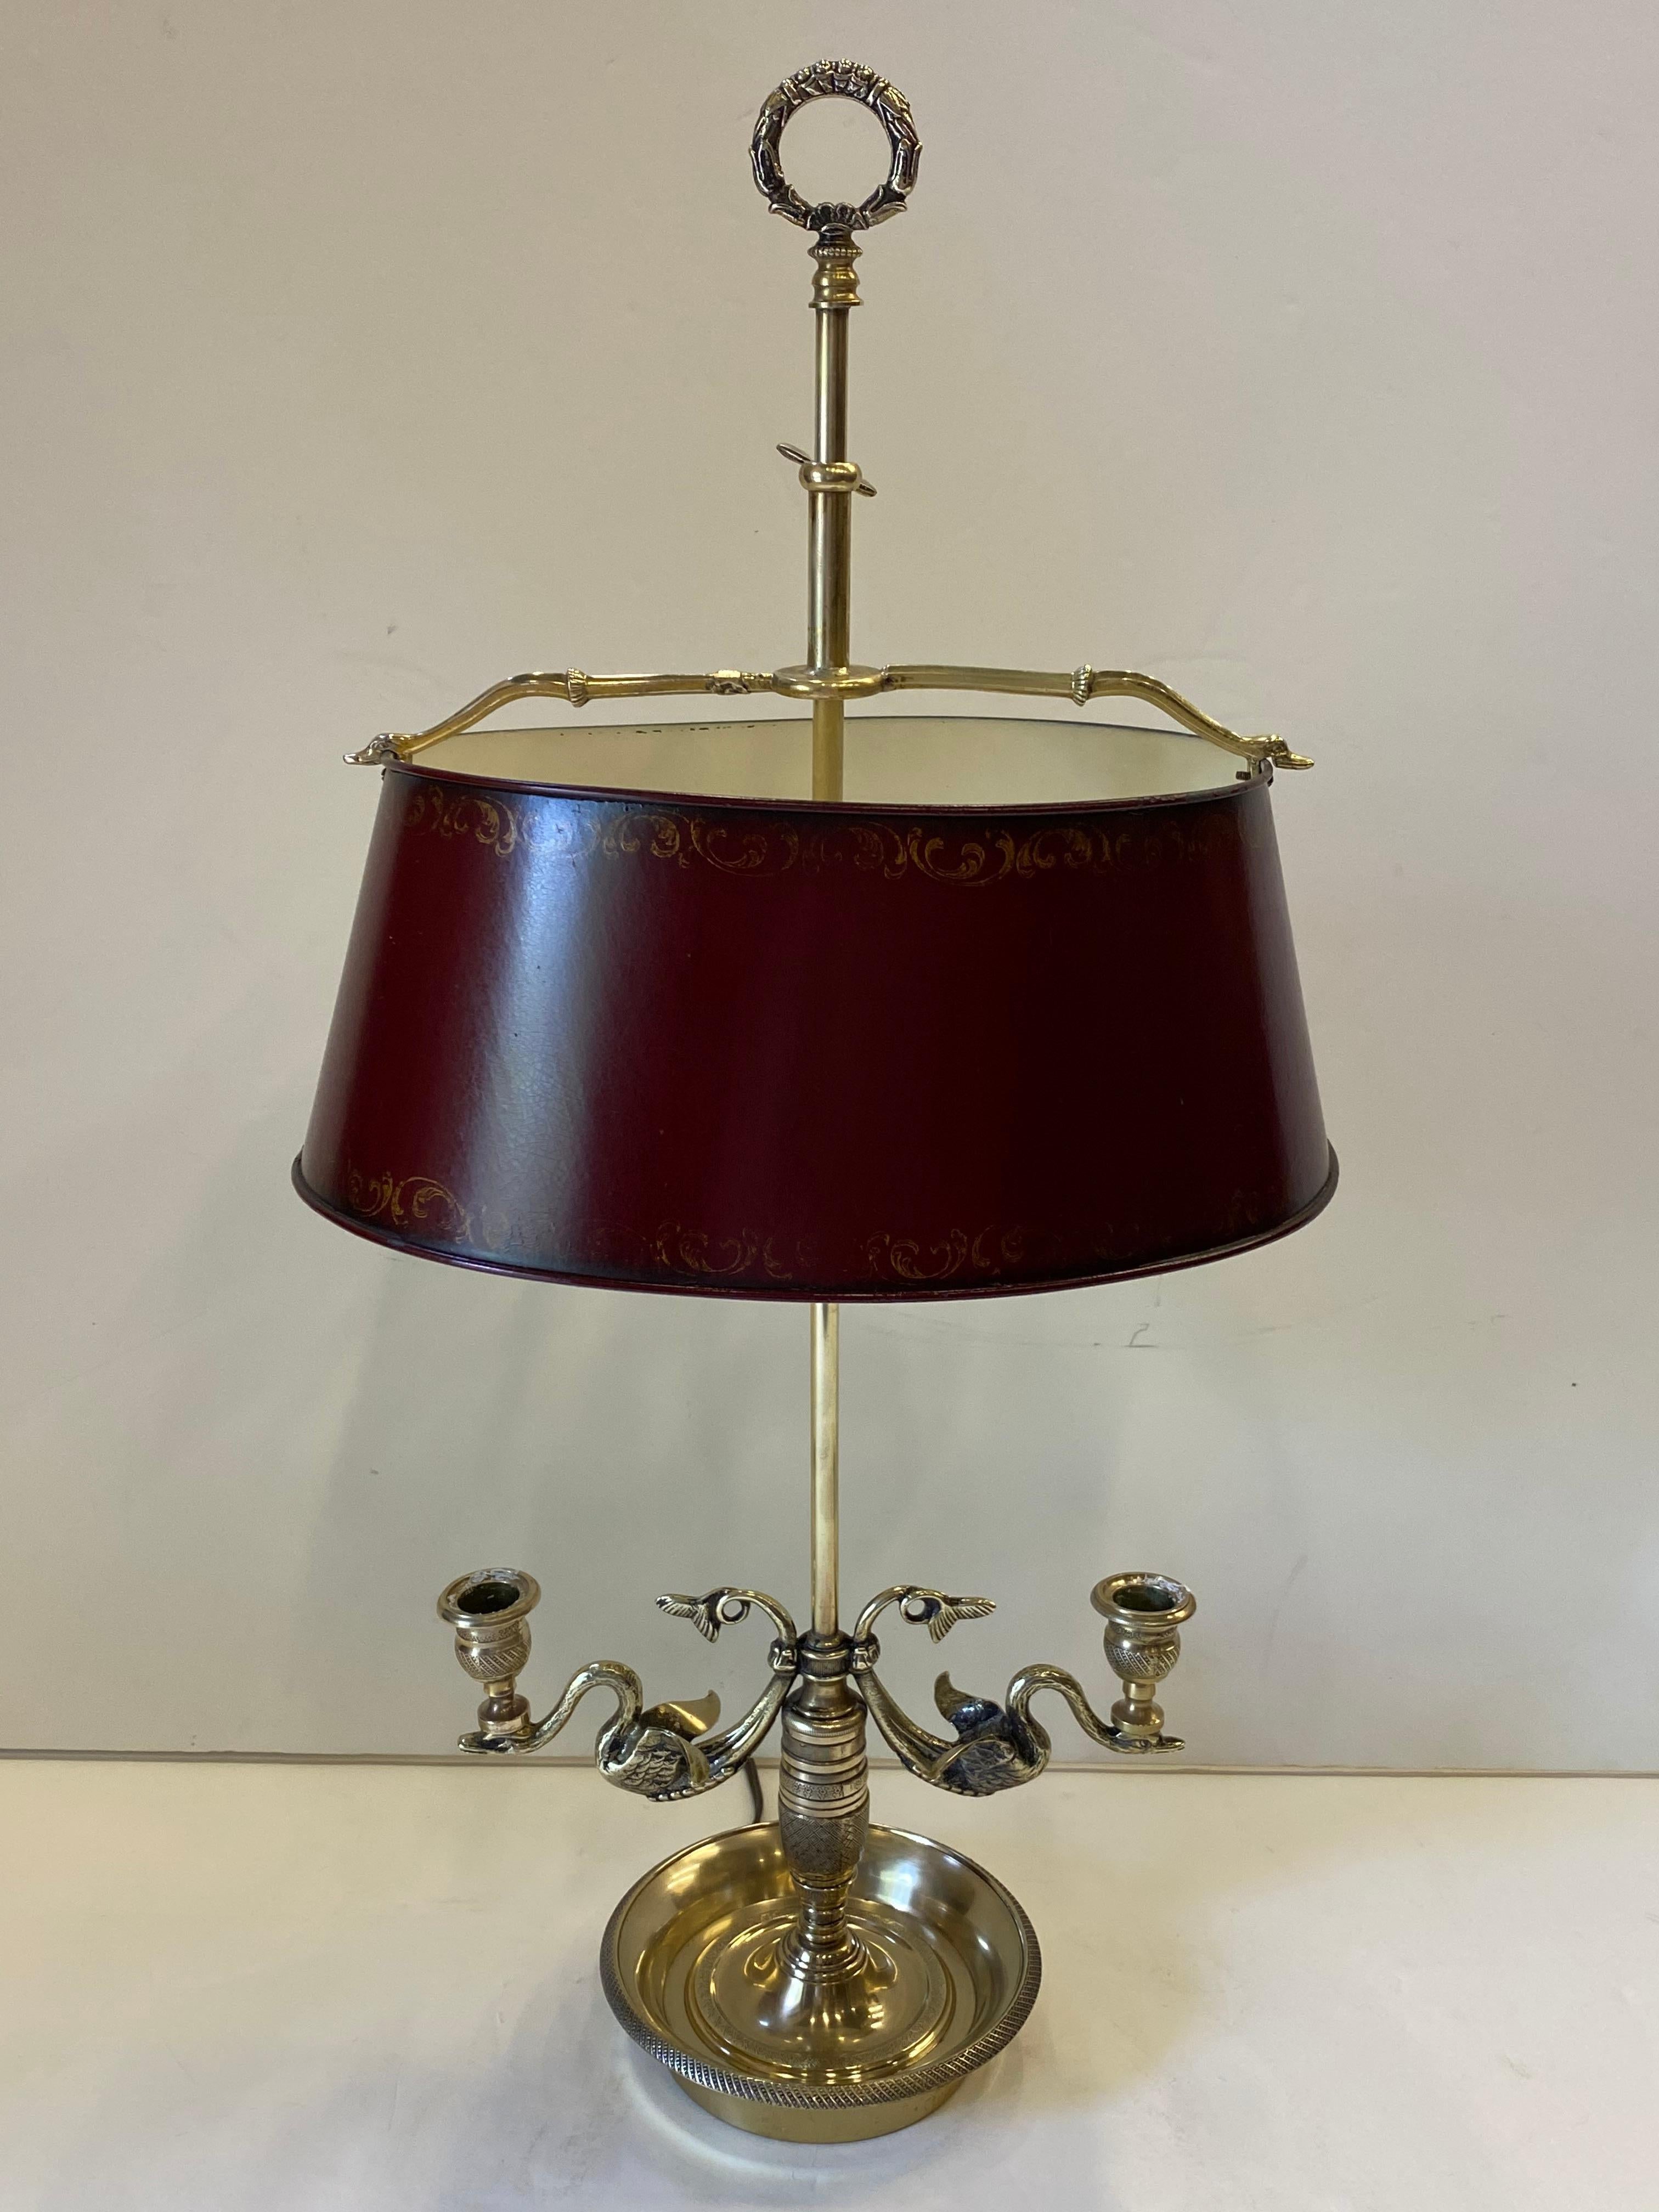 Elegant Classic bouillette style French cast brass lamp having lovely swan motife, pretty detailing on the brass and painted tole shade.